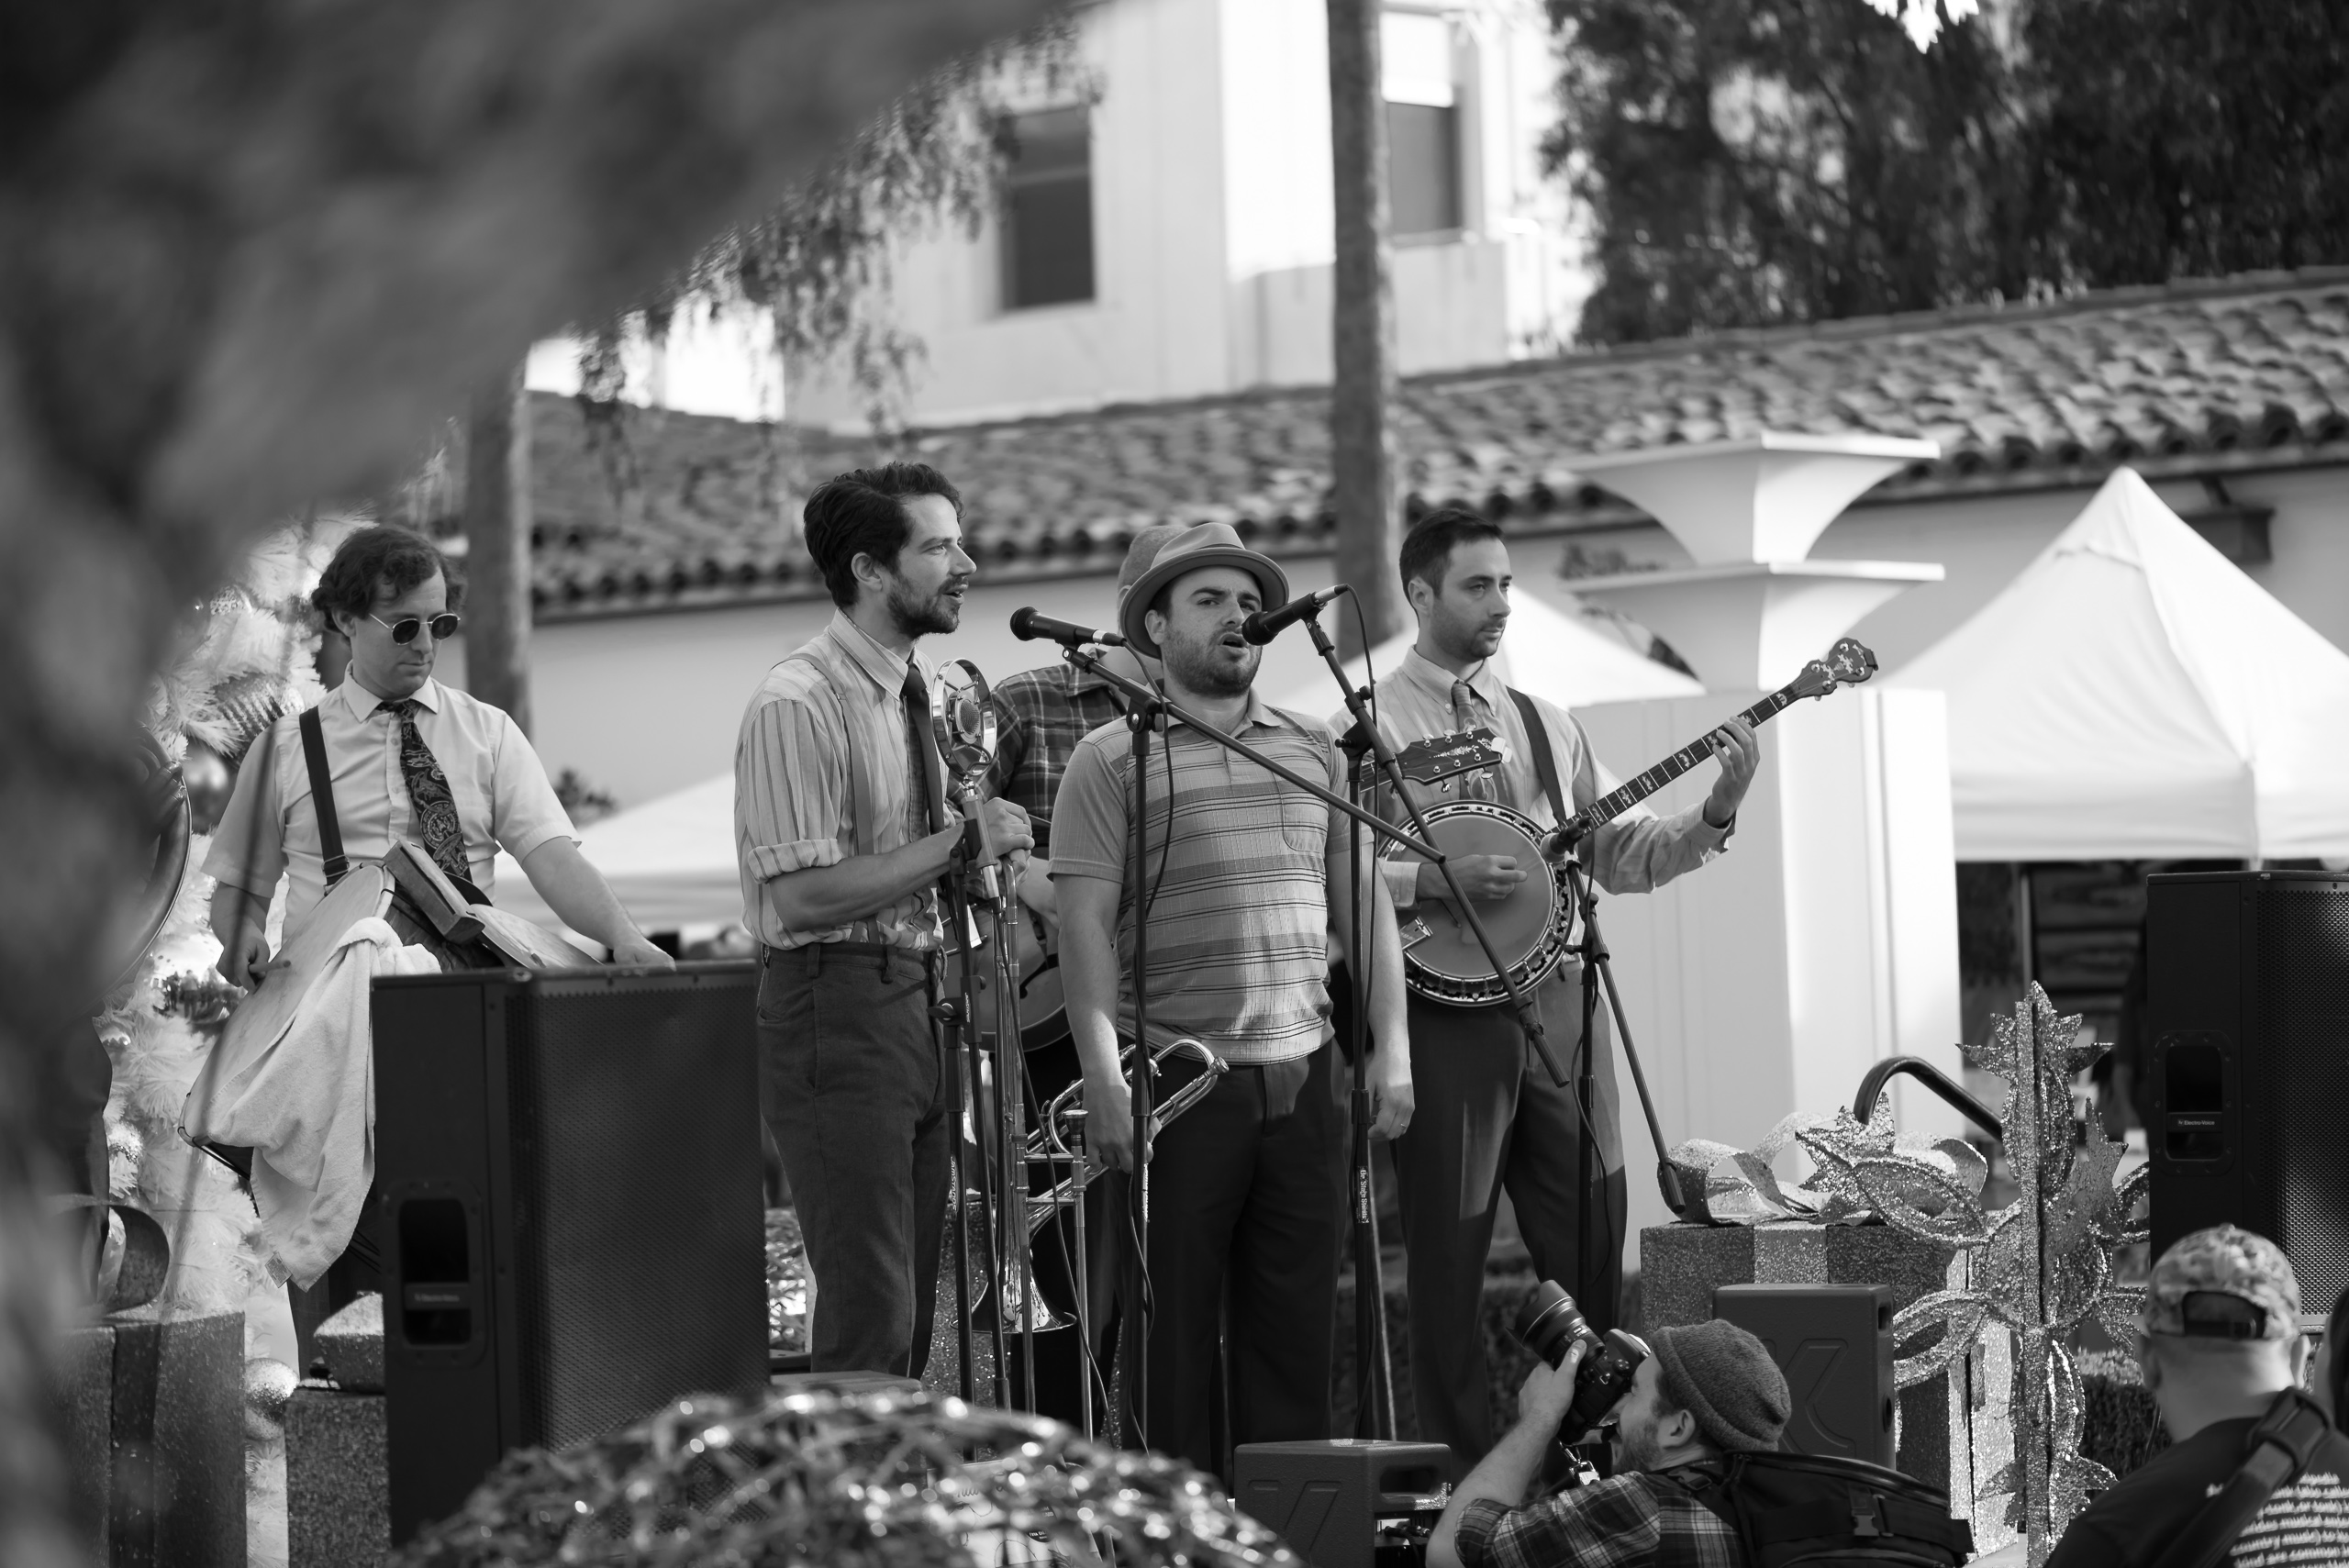 The California Feetwarmers jazz band performing on an outdoor state at Union Station in Downtown Los Angeles